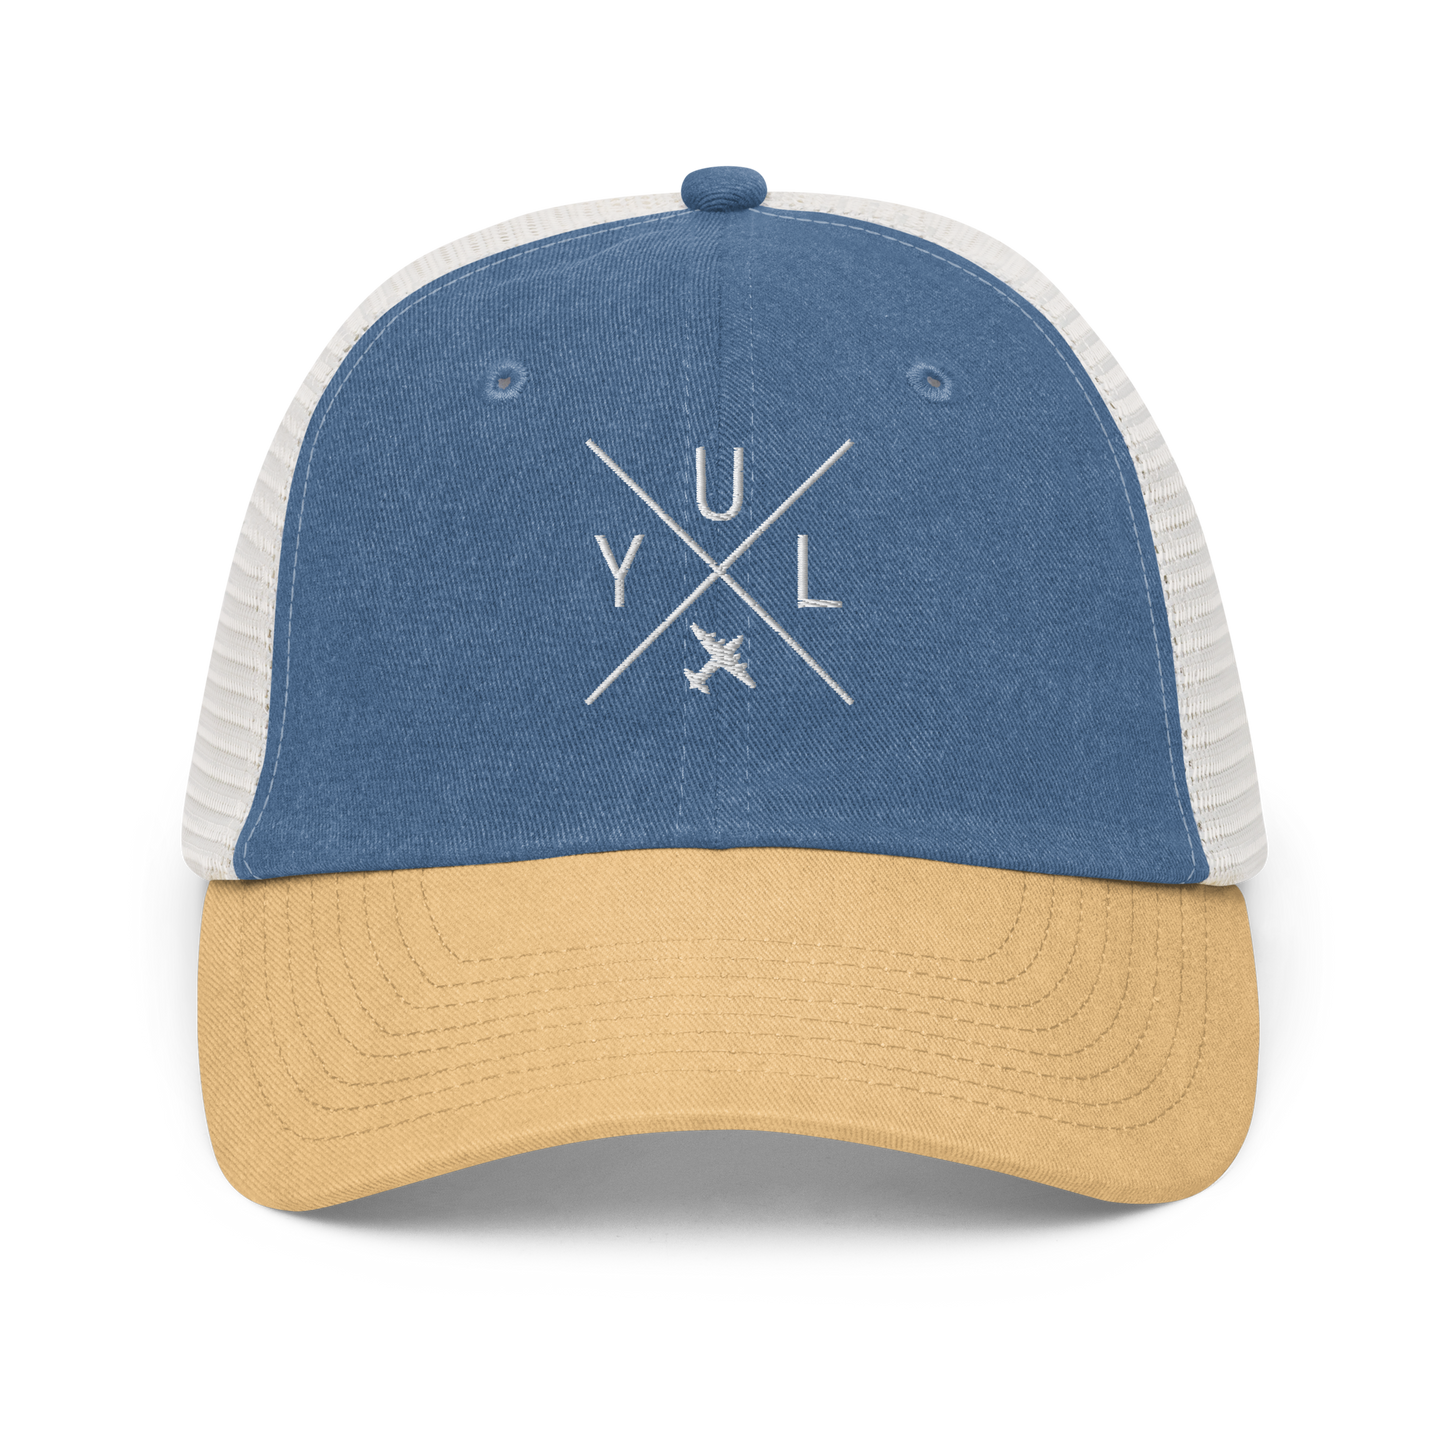 YHM Designs - YUL Montreal Pigment-Dyed Trucker Cap - Crossed-X Design with Airport Code and Vintage Propliner - White Embroidery - Image 01